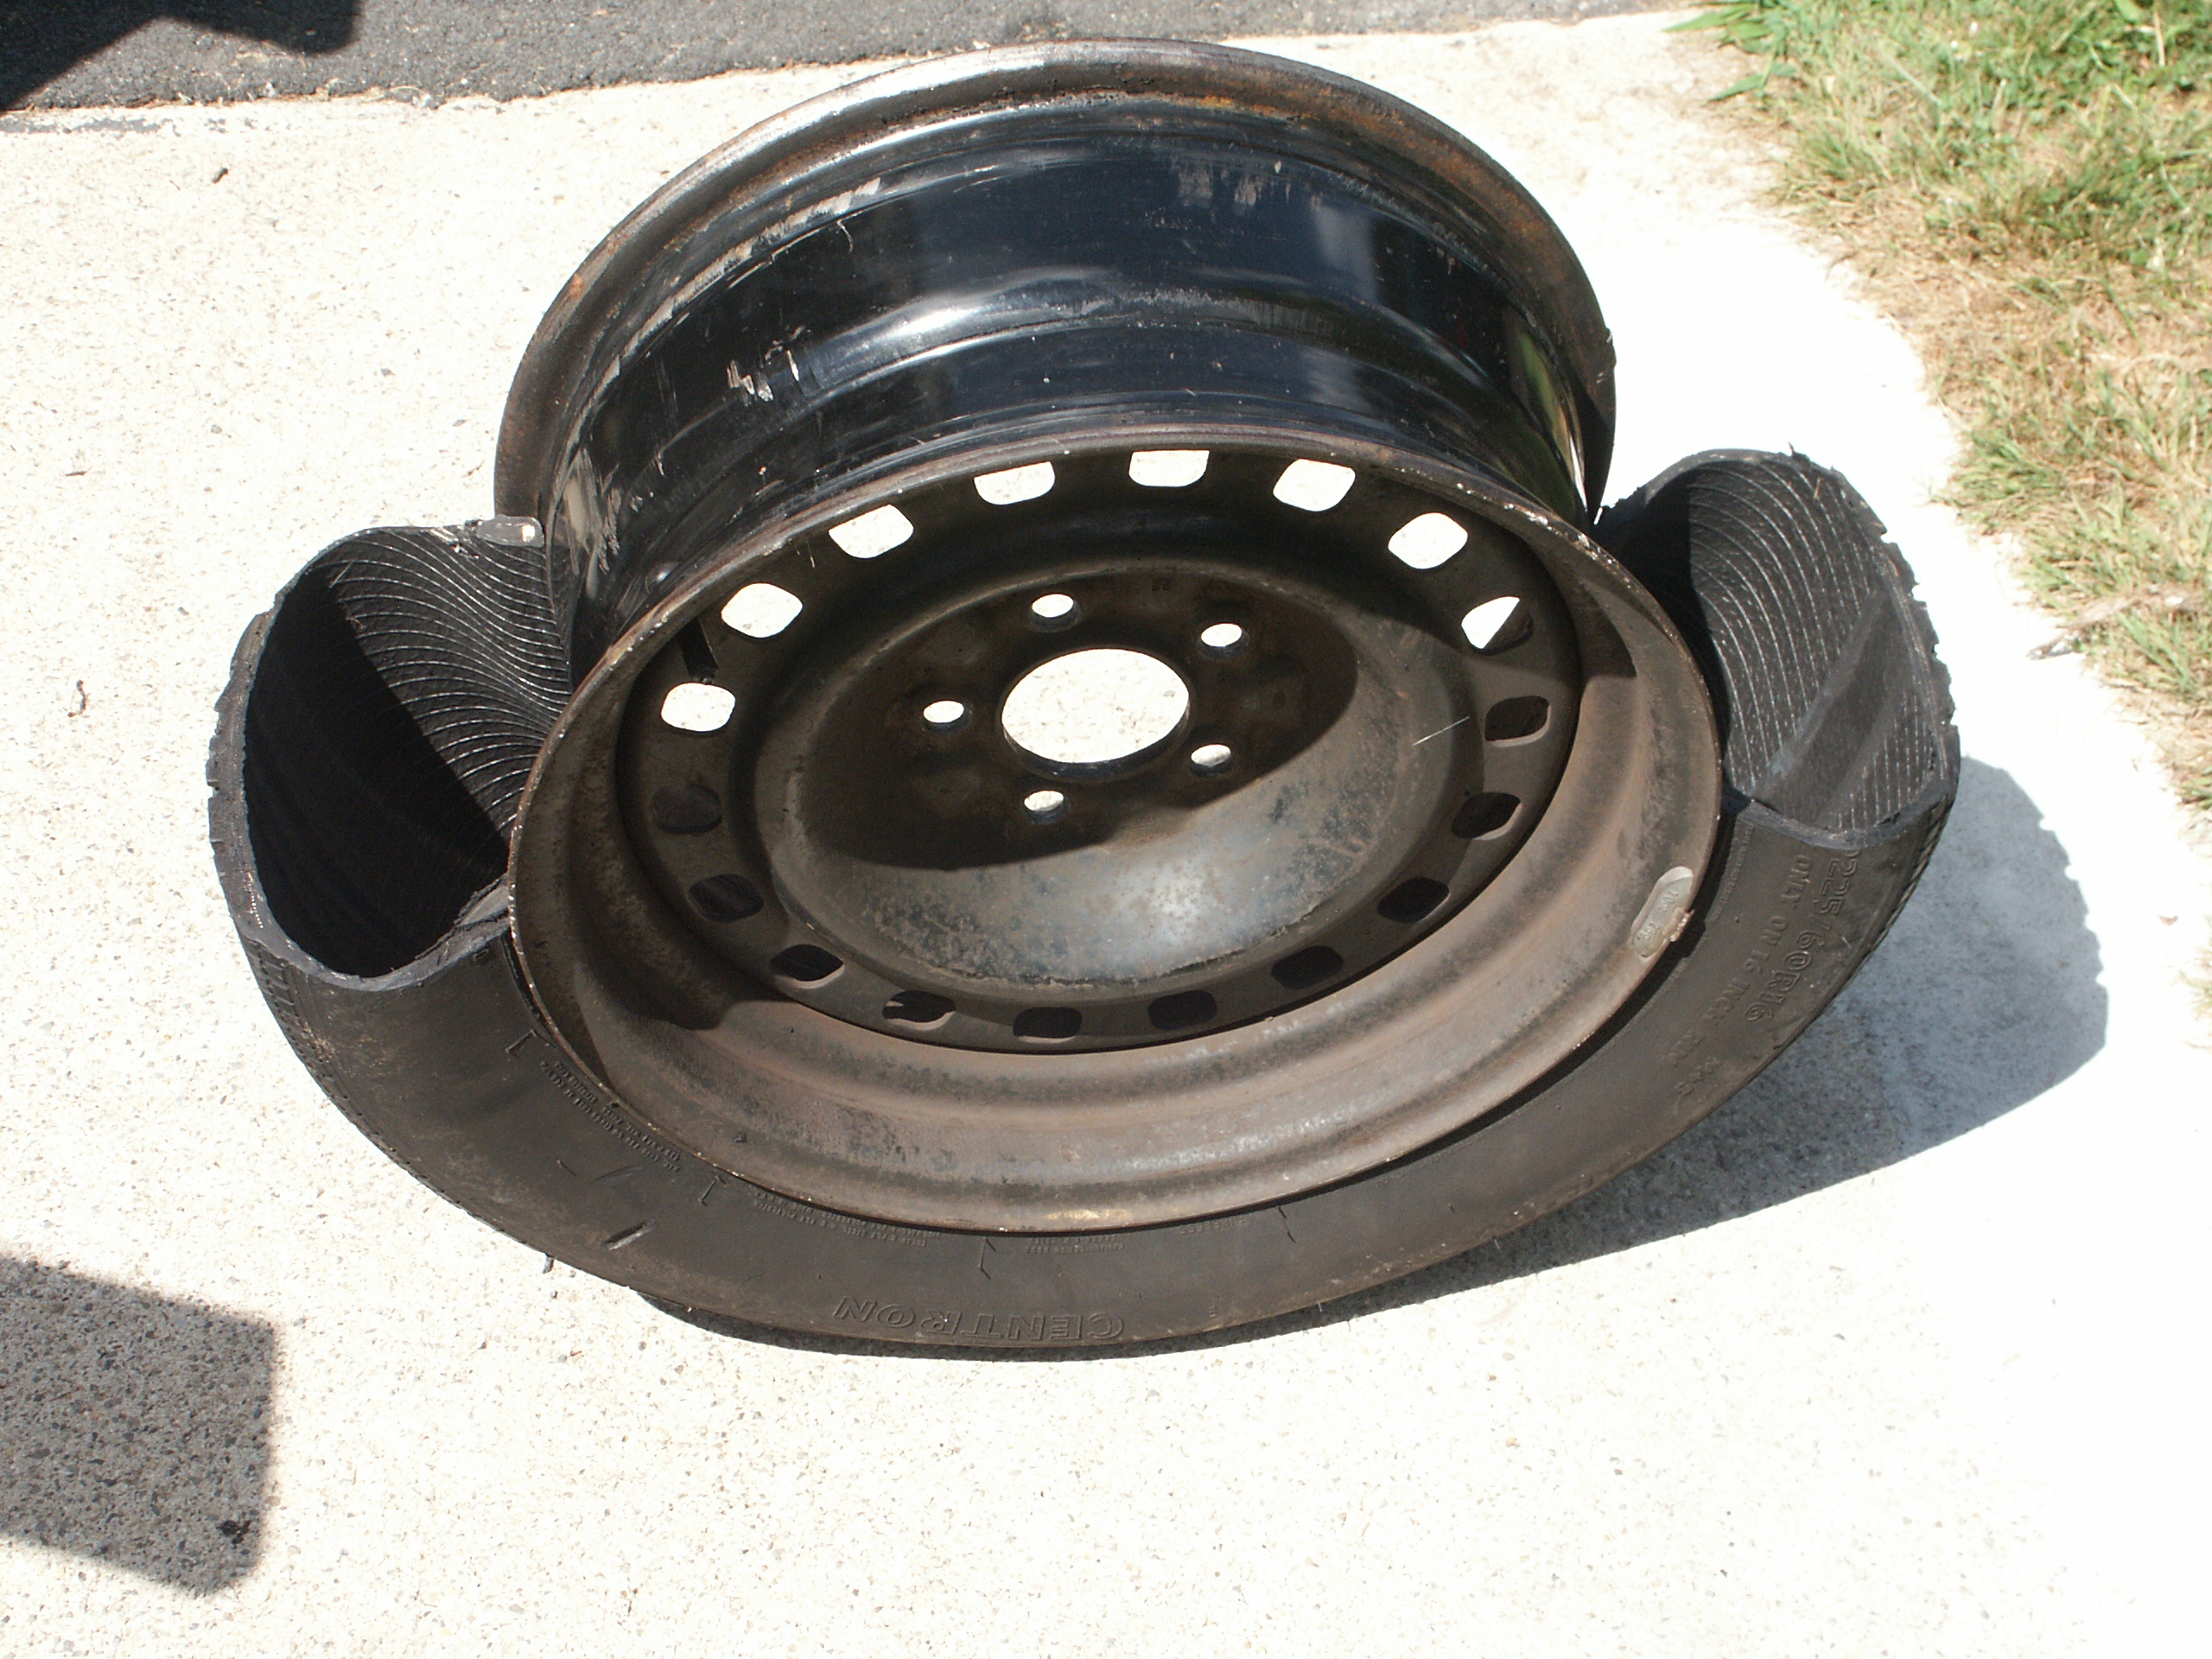 Cutting Apart A Steel Belted Radial Car Tire